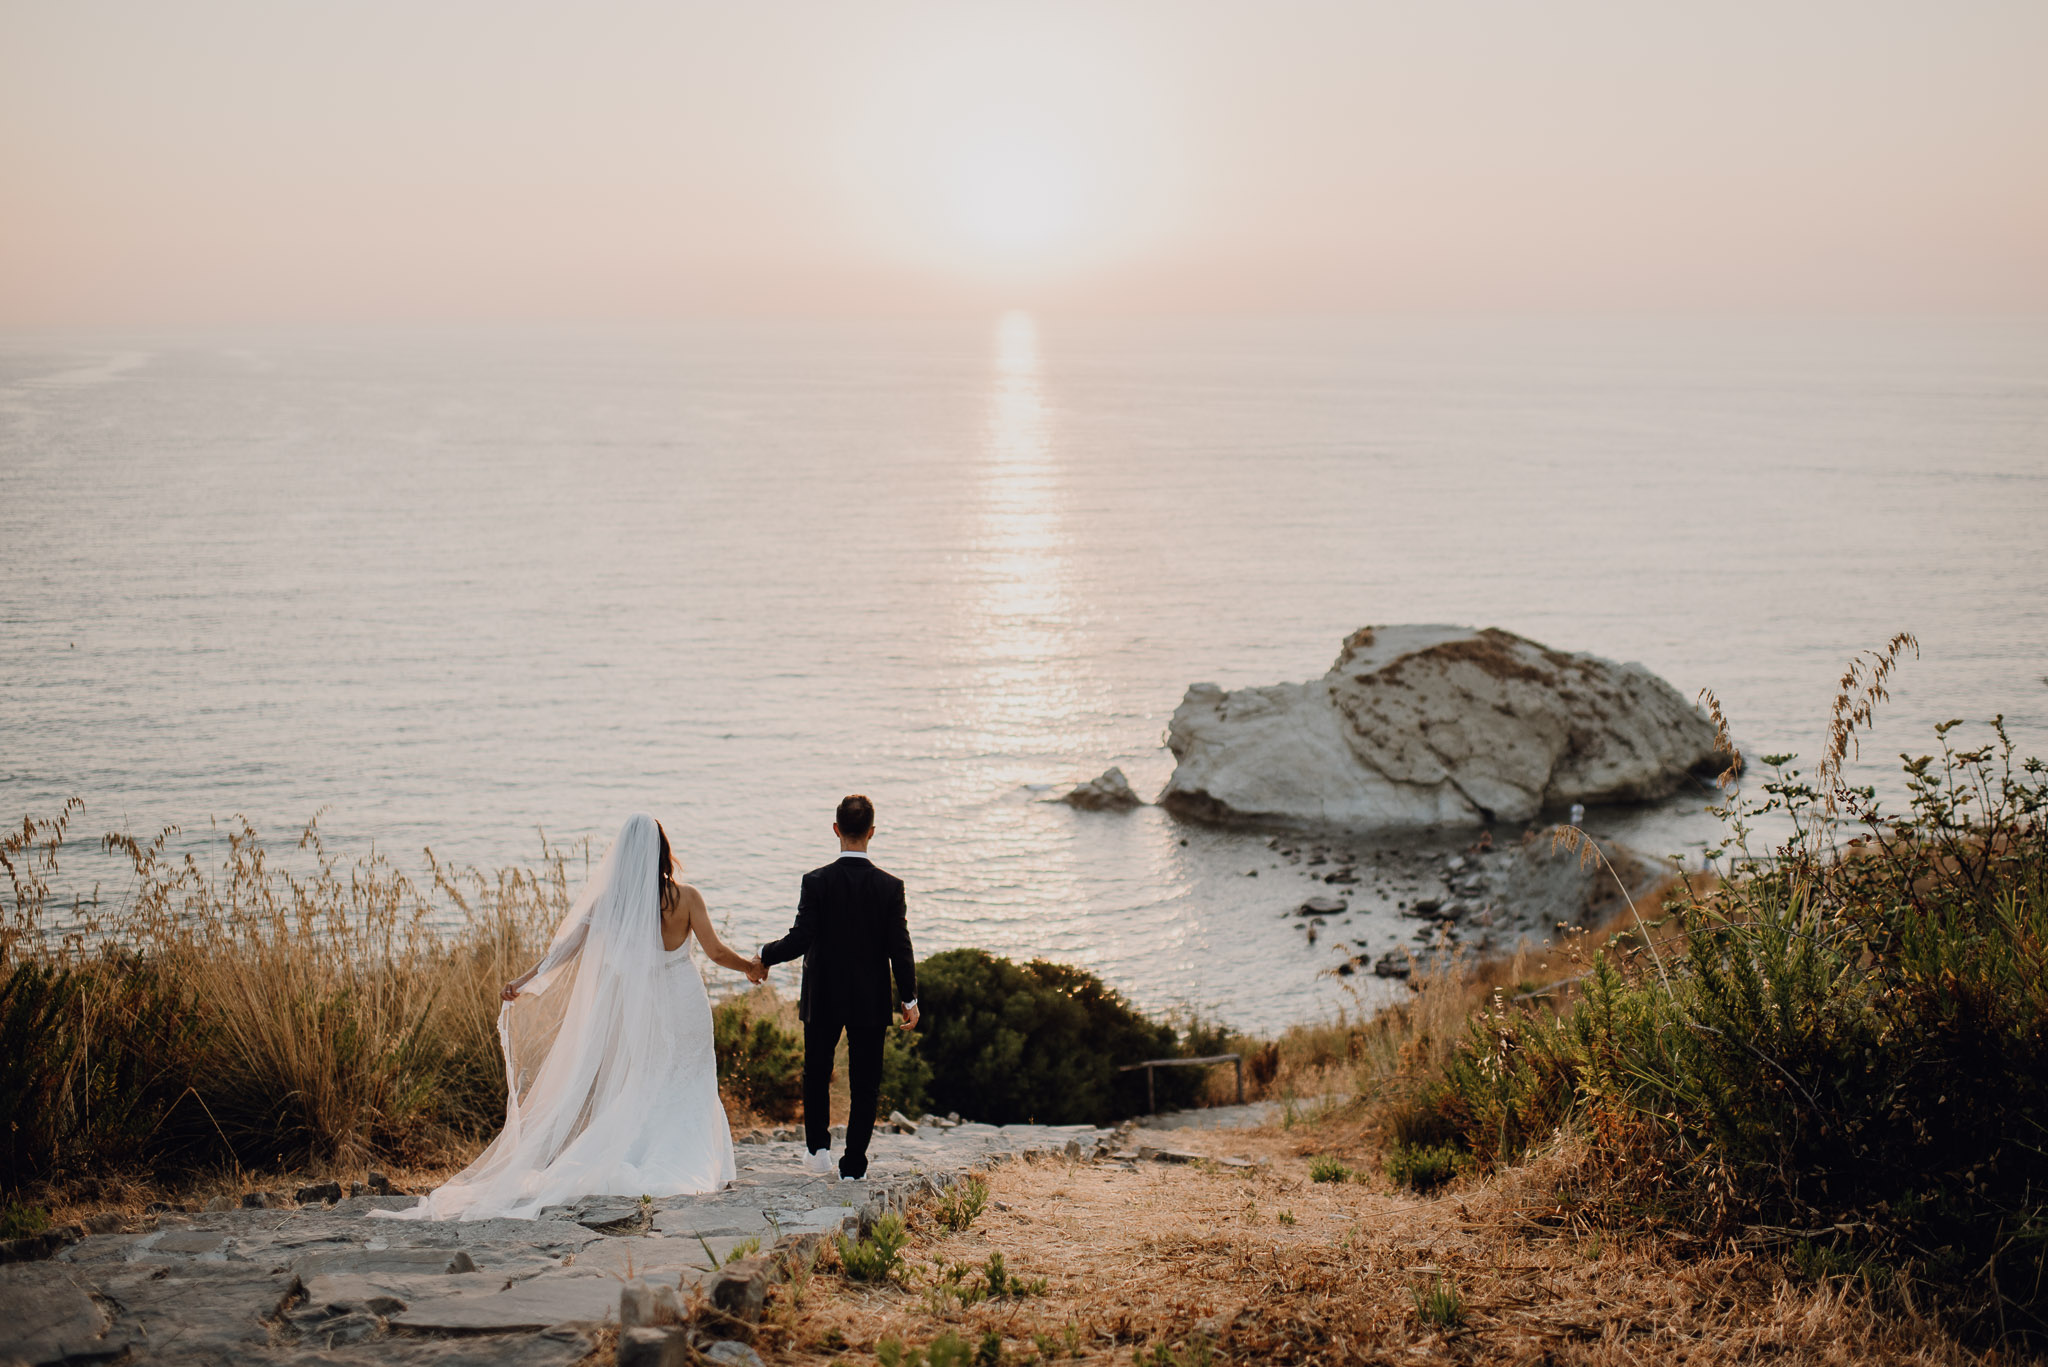 outdoor wedding in italy on the beach